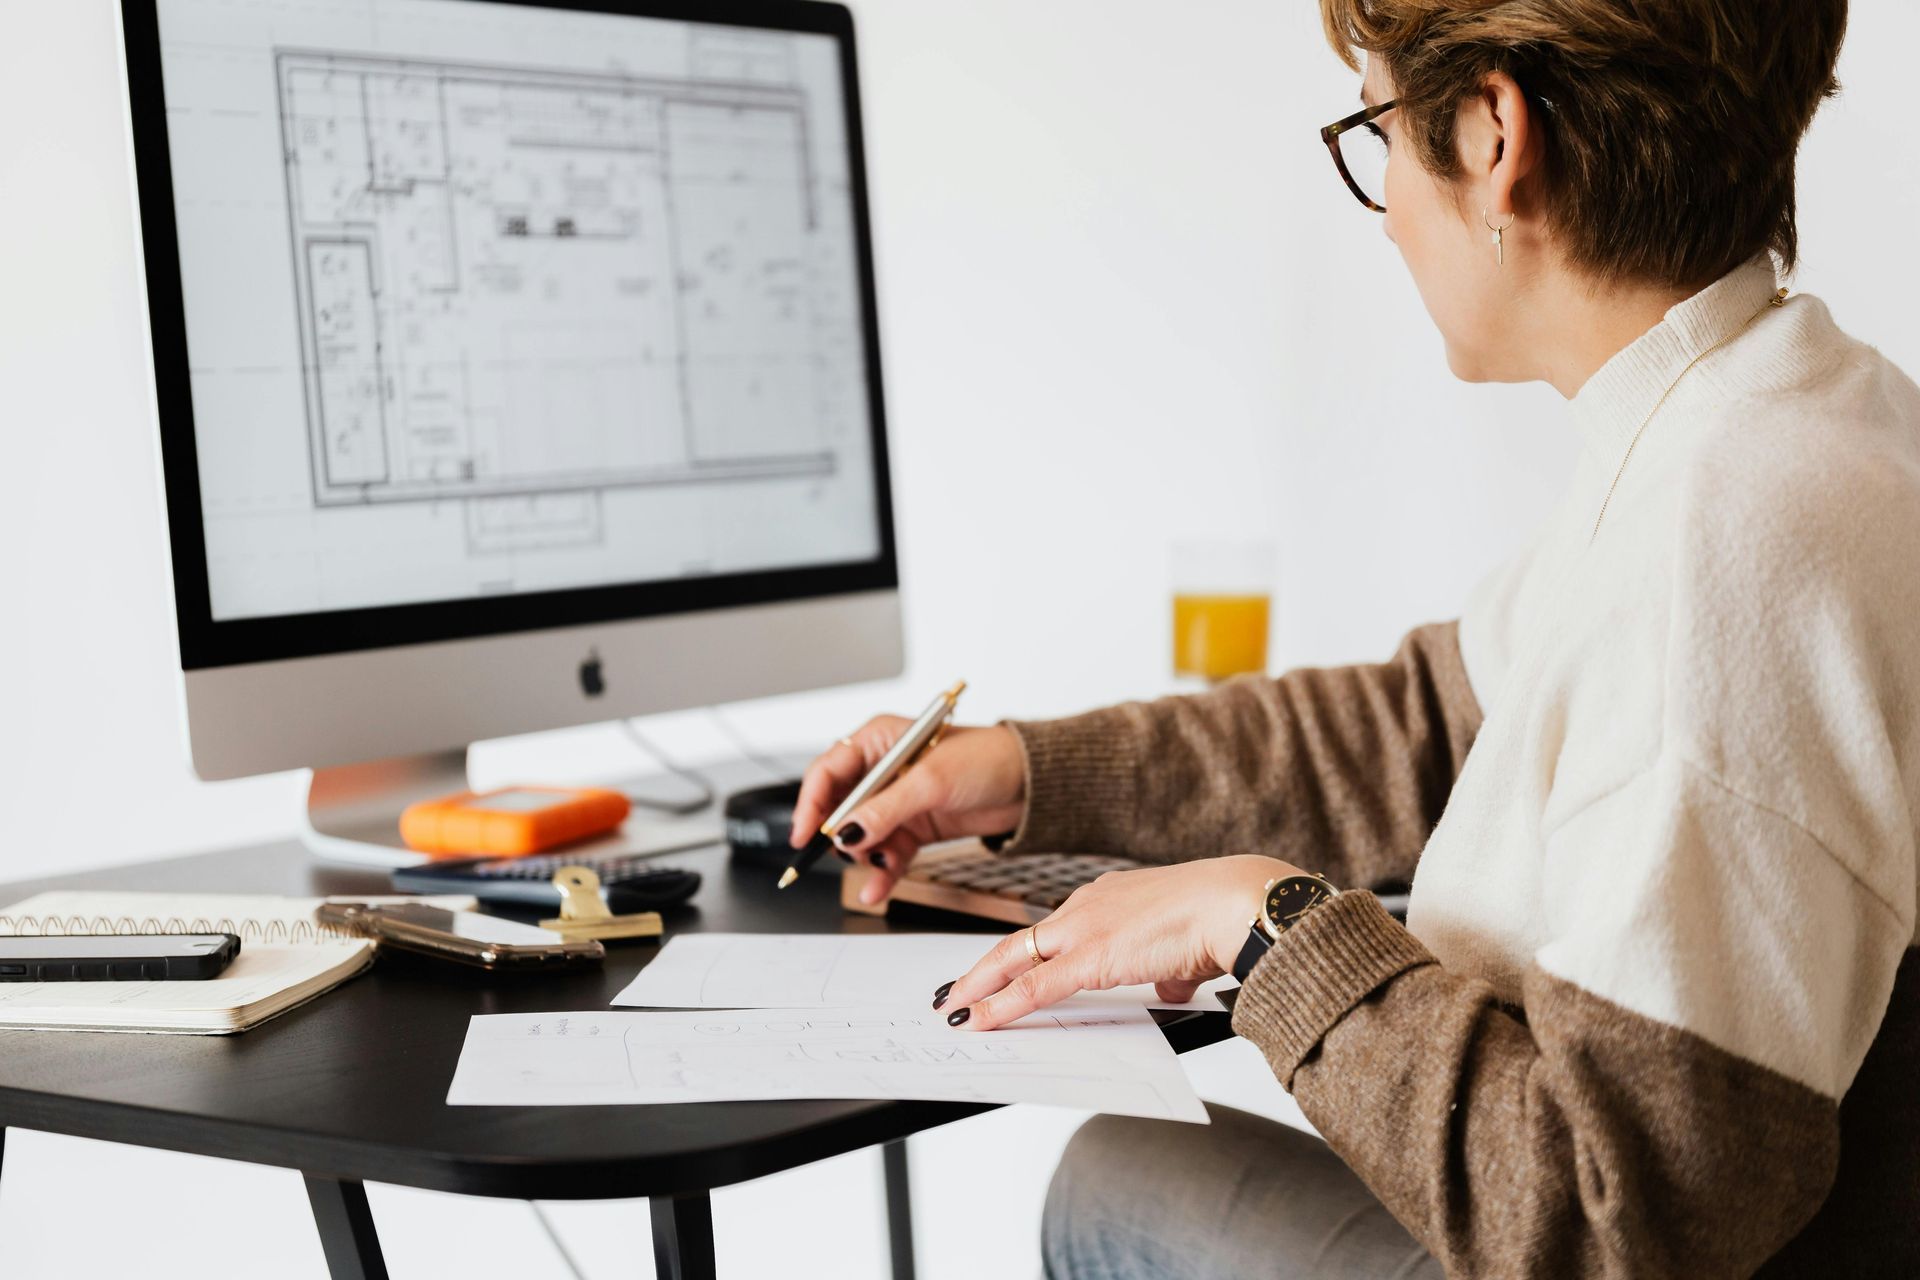 A lady is sat at a desk considering the floor plan of a building